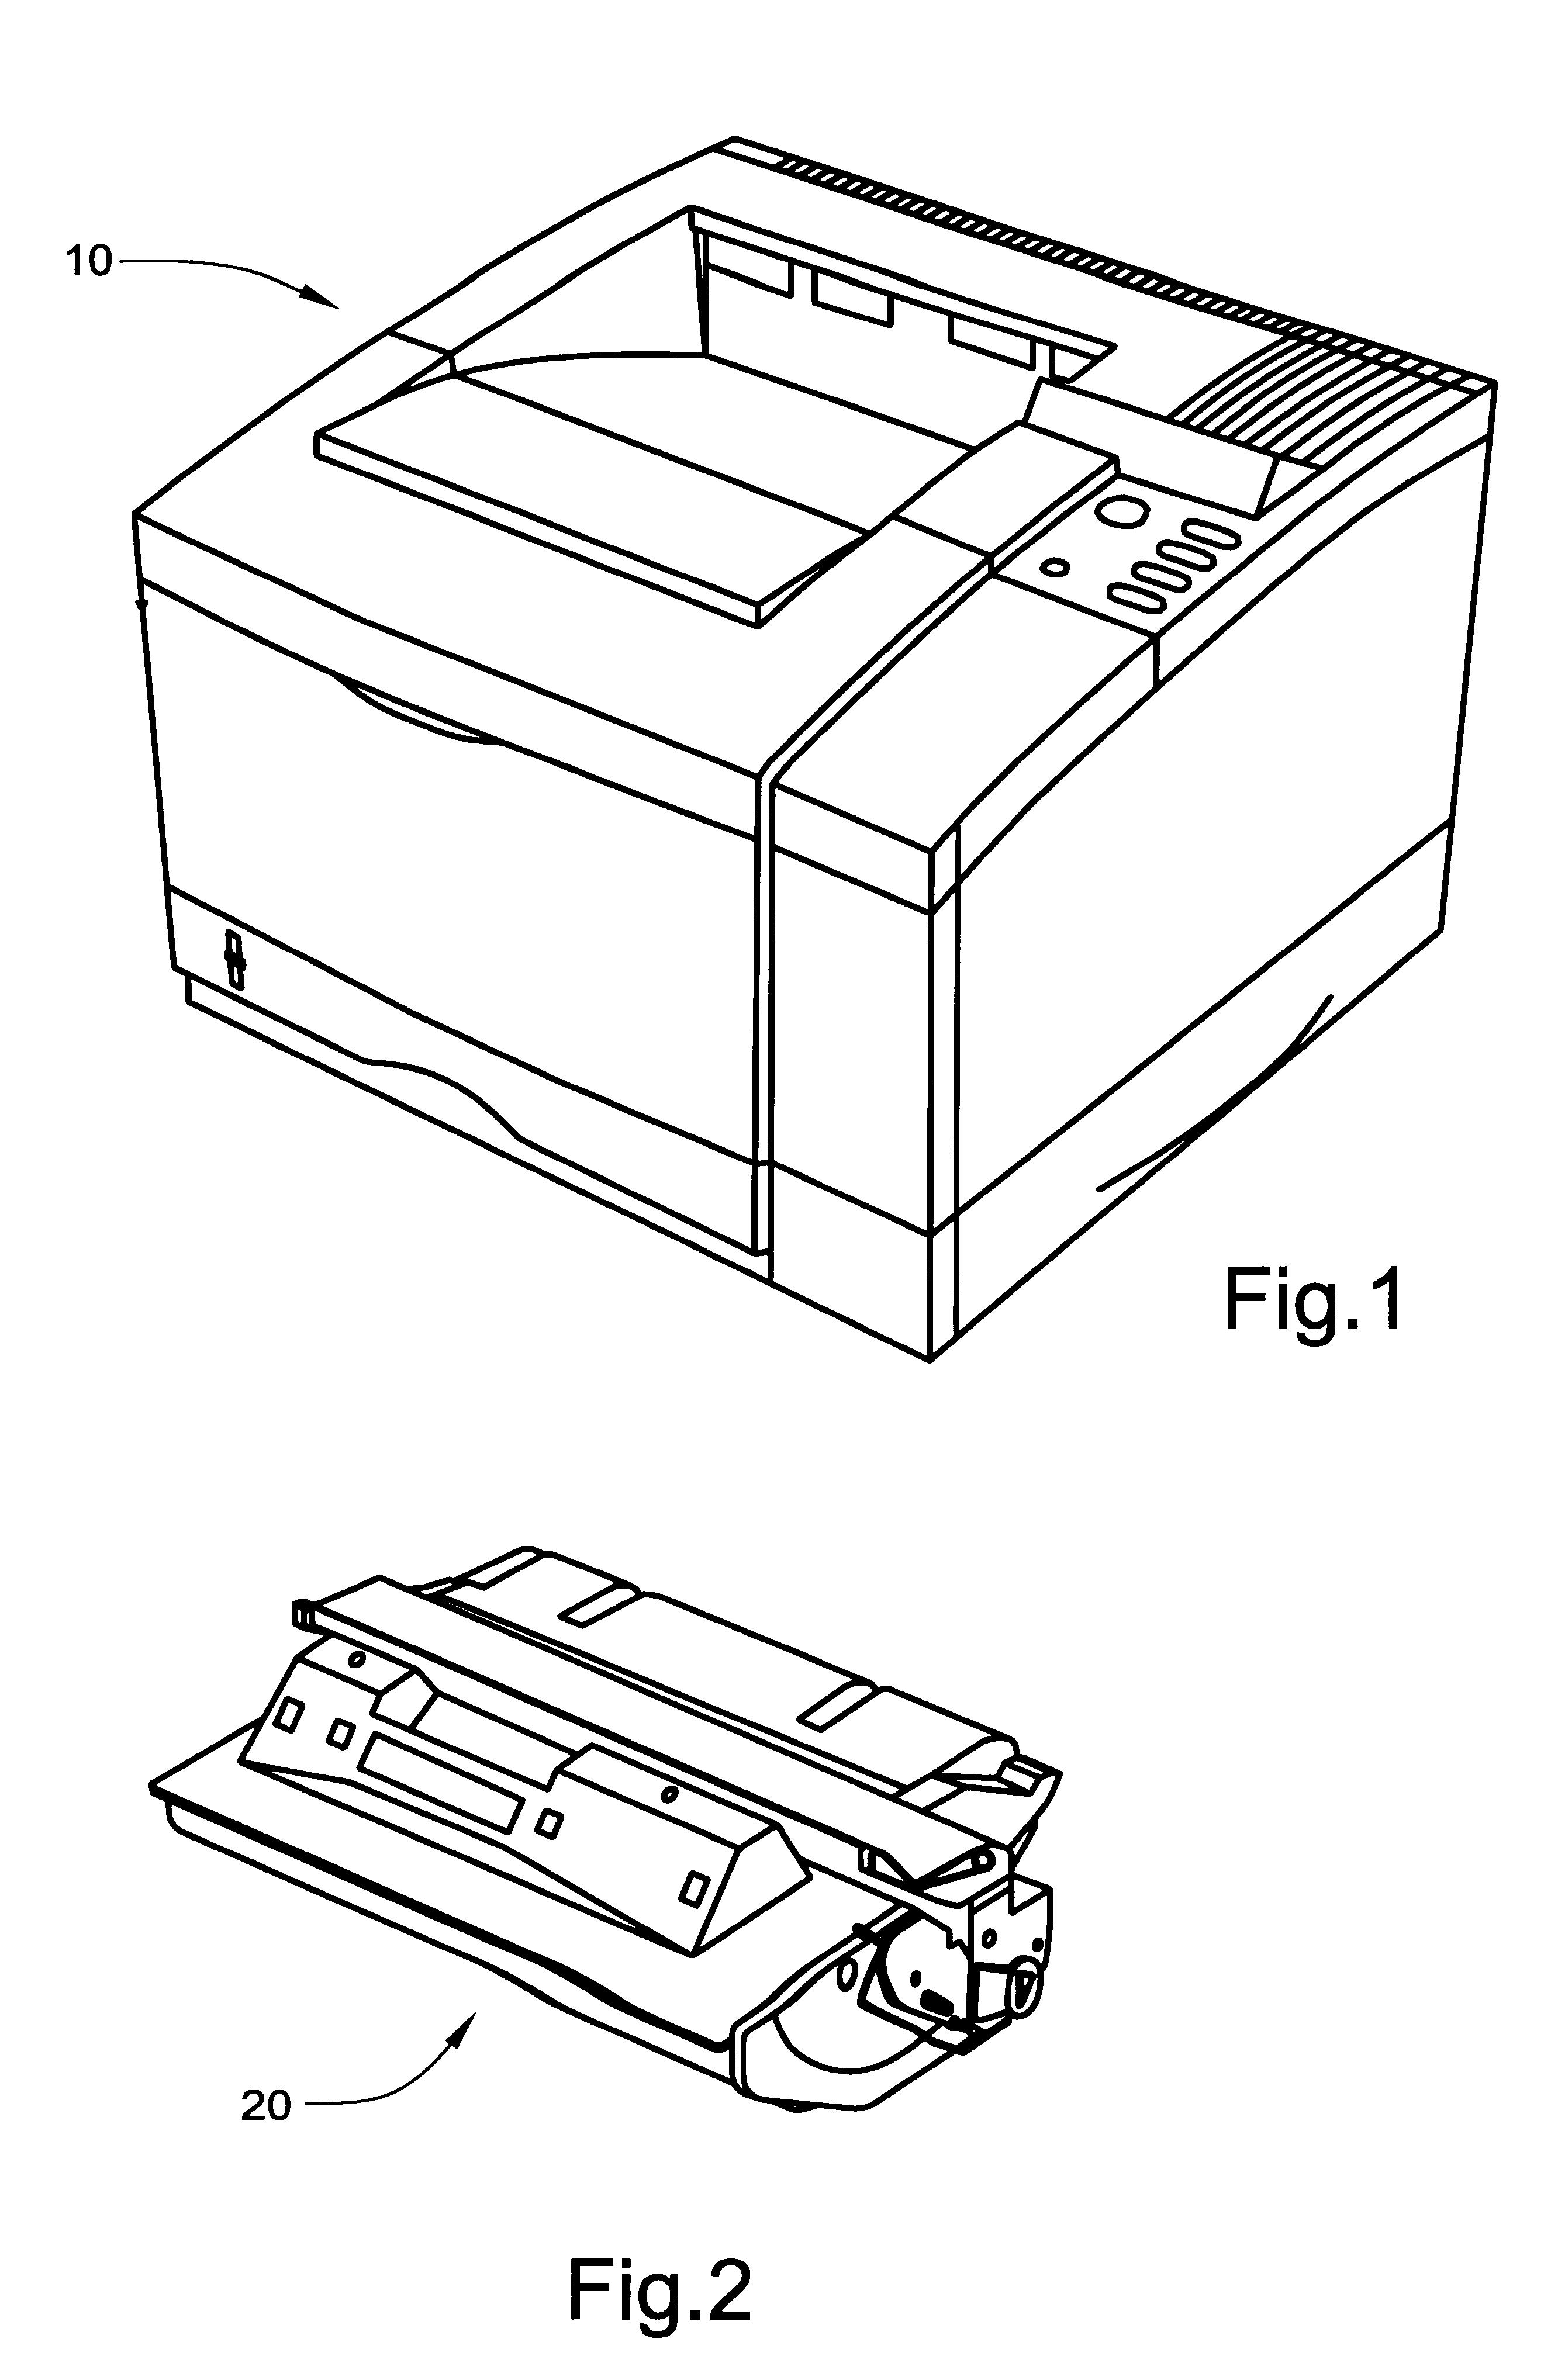 Non-contacting communication and power interface between a printing engine and peripheral systems attached to replaceable printer component